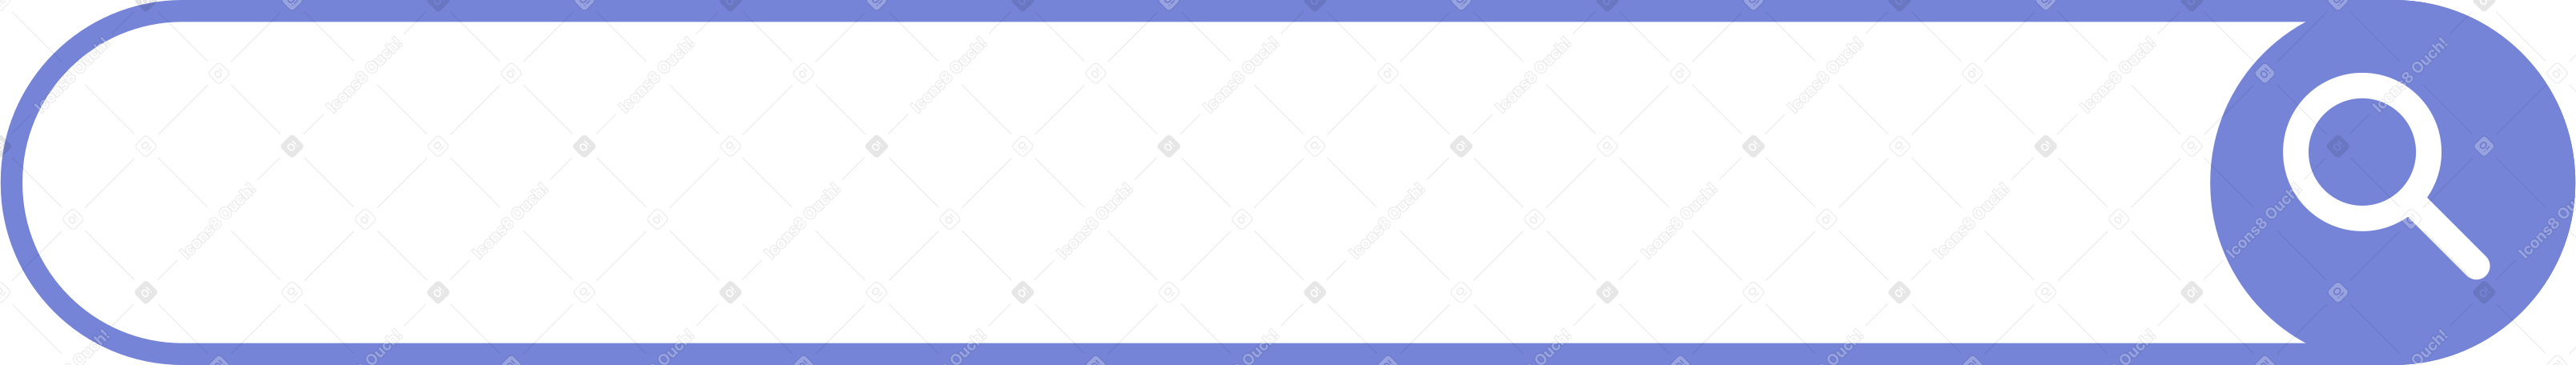 browser search box Illustration in PNG, SVG